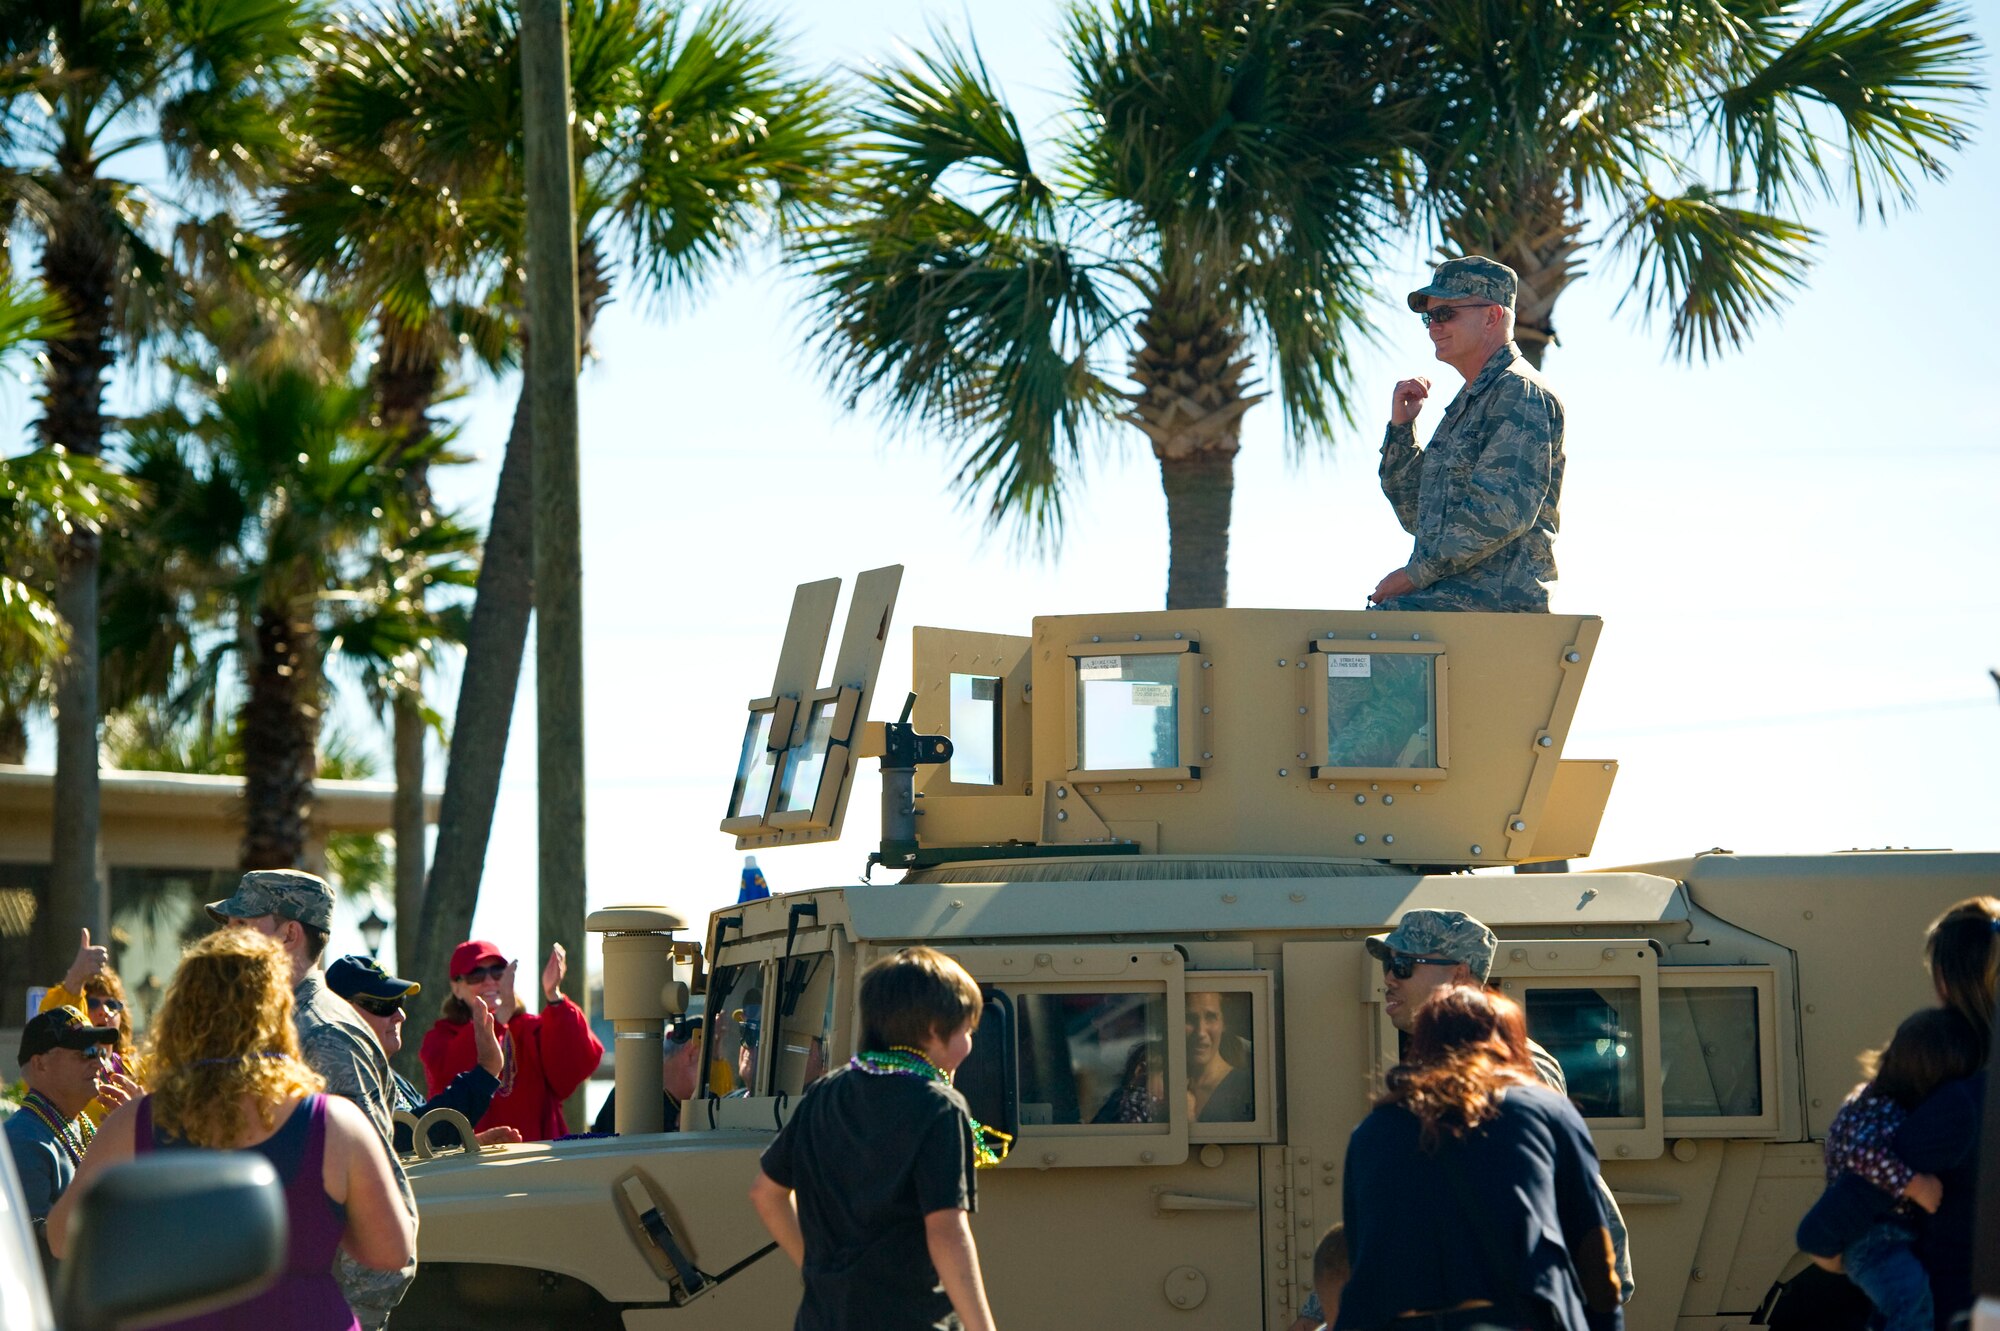 Col. Troy Molnar, commander of 1st Special Operations Medical Group, rides atop a High Mobility Multipurpose Wheeled Vehicle during a mardi gras parade at Navarre Beach, Fla., Feb. 2, 2013. Molnar was accompanied by a dozen volunteers from Hurlburt Field who walked alongside the vehicle in the parade. (U.S. Air Force photo / Tech. Sgt. Vanessa Valentine)